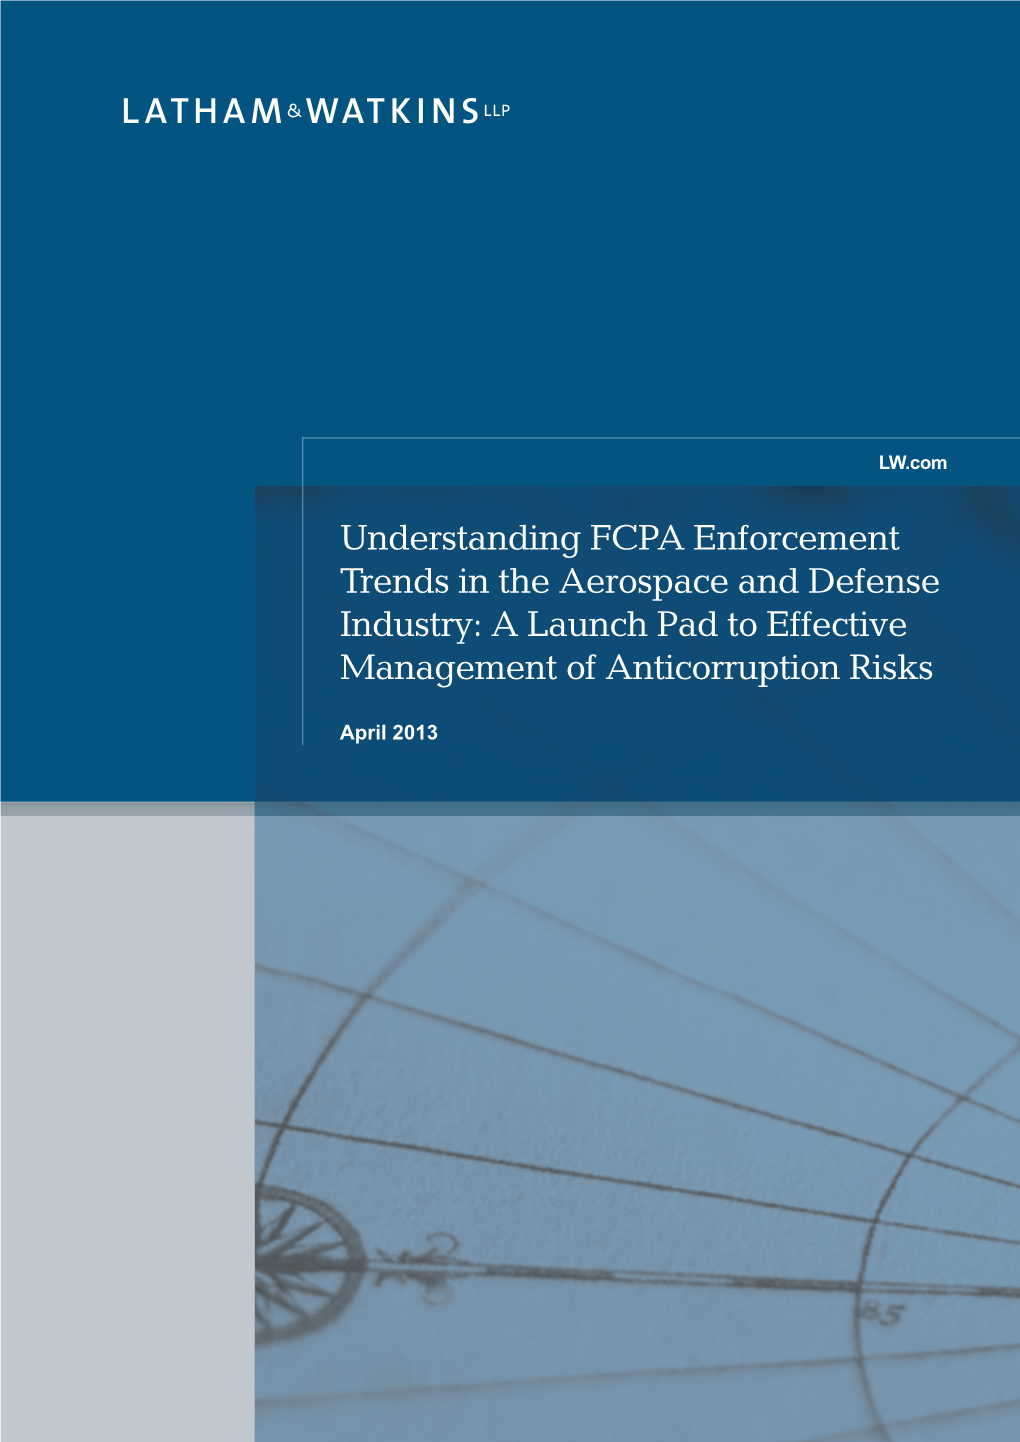 Understanding FCPA Enforcement Trends in the Aerospace and Defense Industry: a Launch Pad to Effective Management of Anticorruption Risks